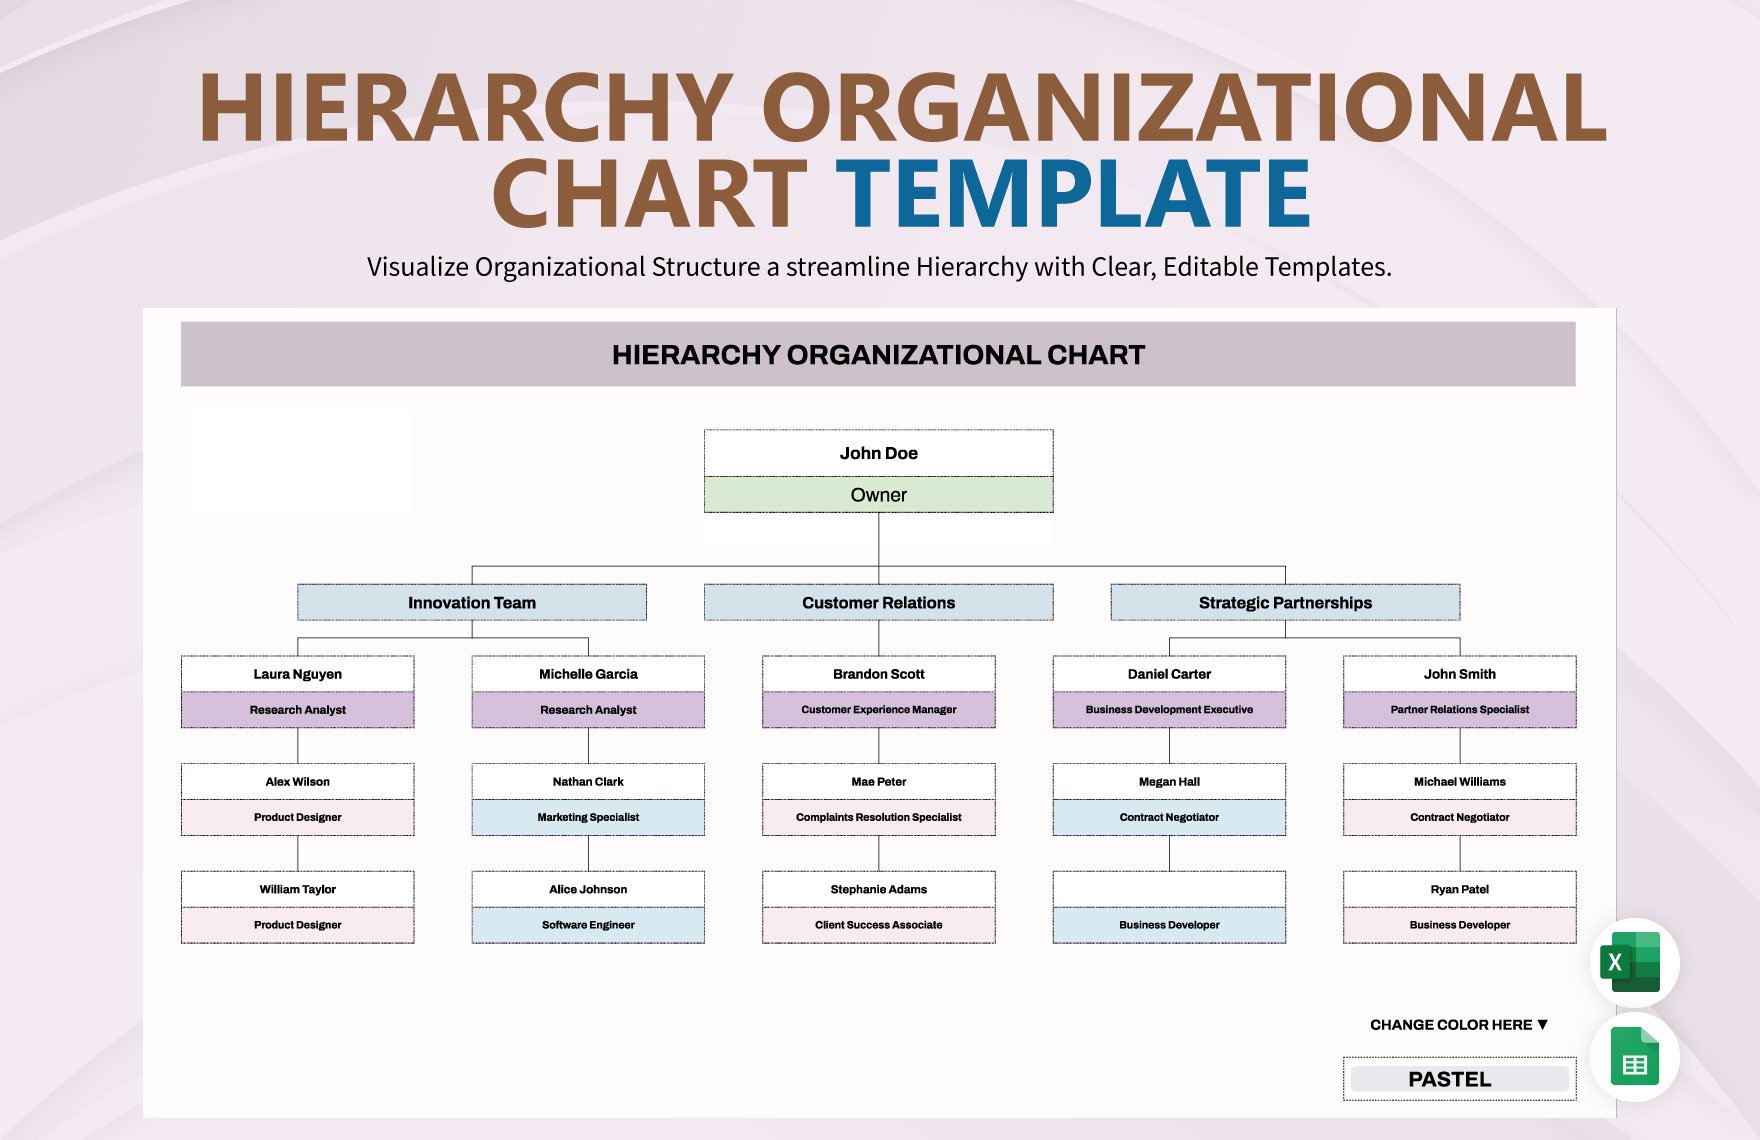 Hierarchy Organizational Chart Template in Excel, Google Sheets